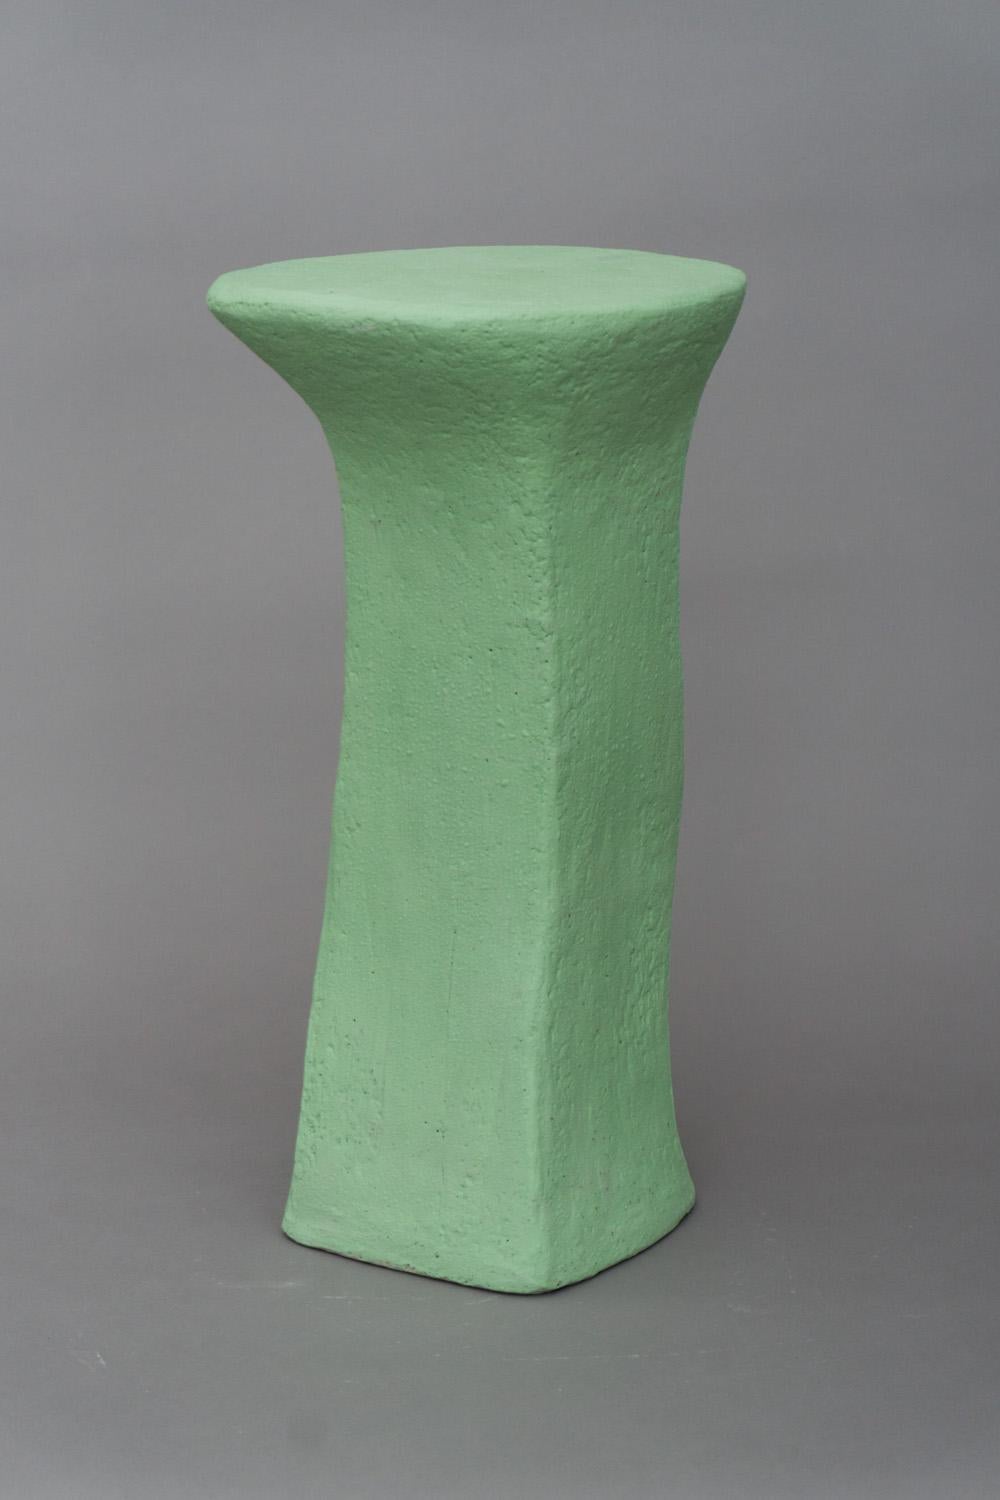 Solid and unique side table made of grey stoneware with a fresh green engobe. Unique and artistic piece by Danish designer and artist Christine Roland. Also used as a seating object due to it's strong production. 
Other models and colors are